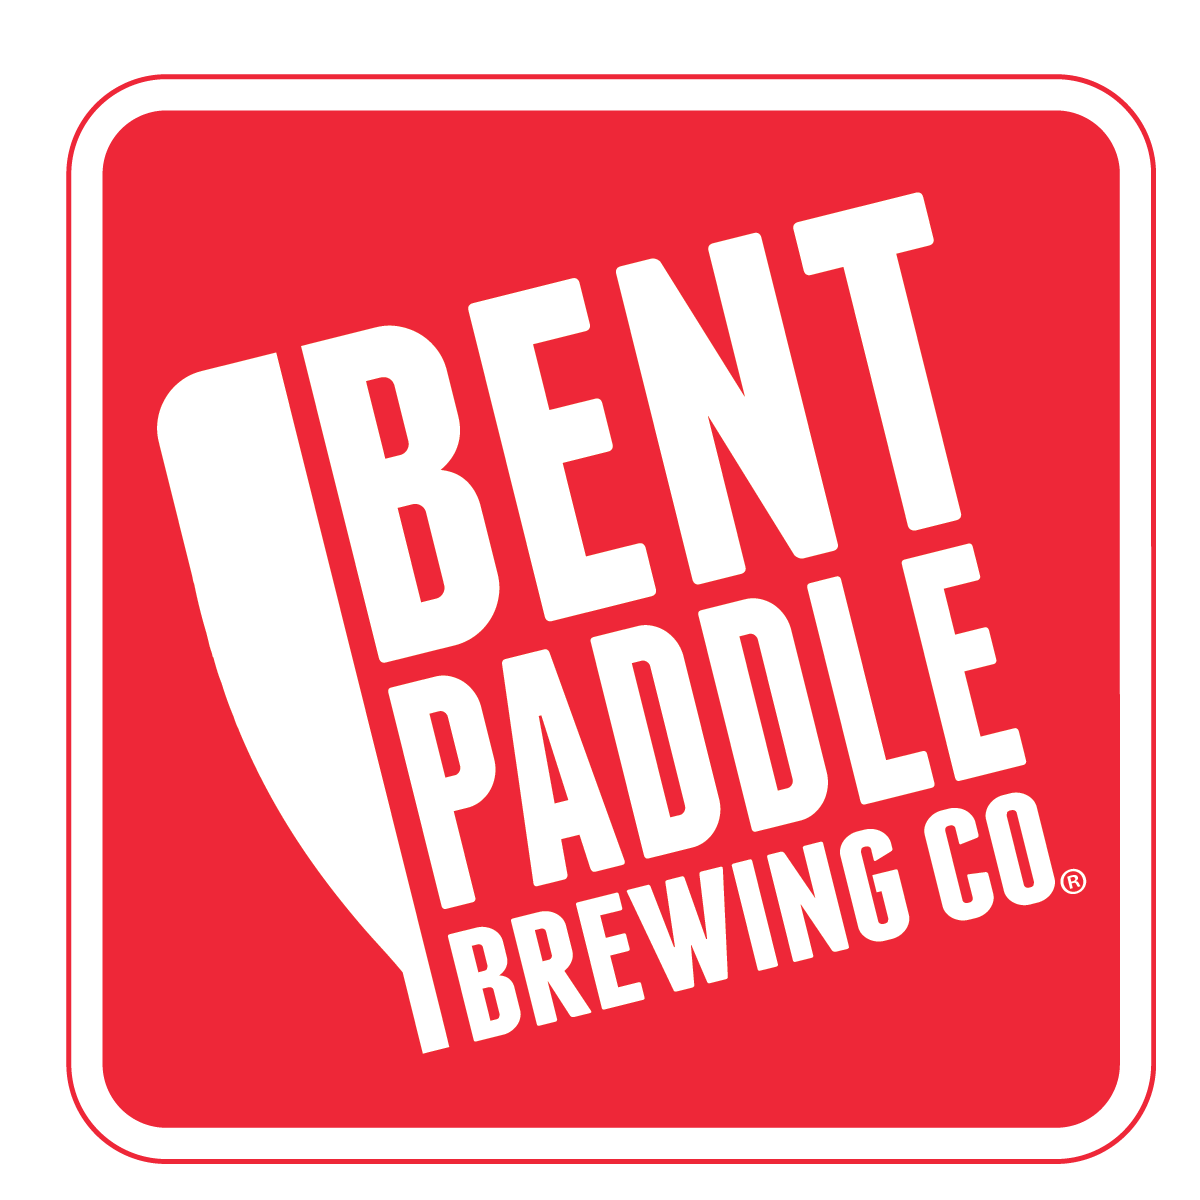 Bent Paddle Brewing Co